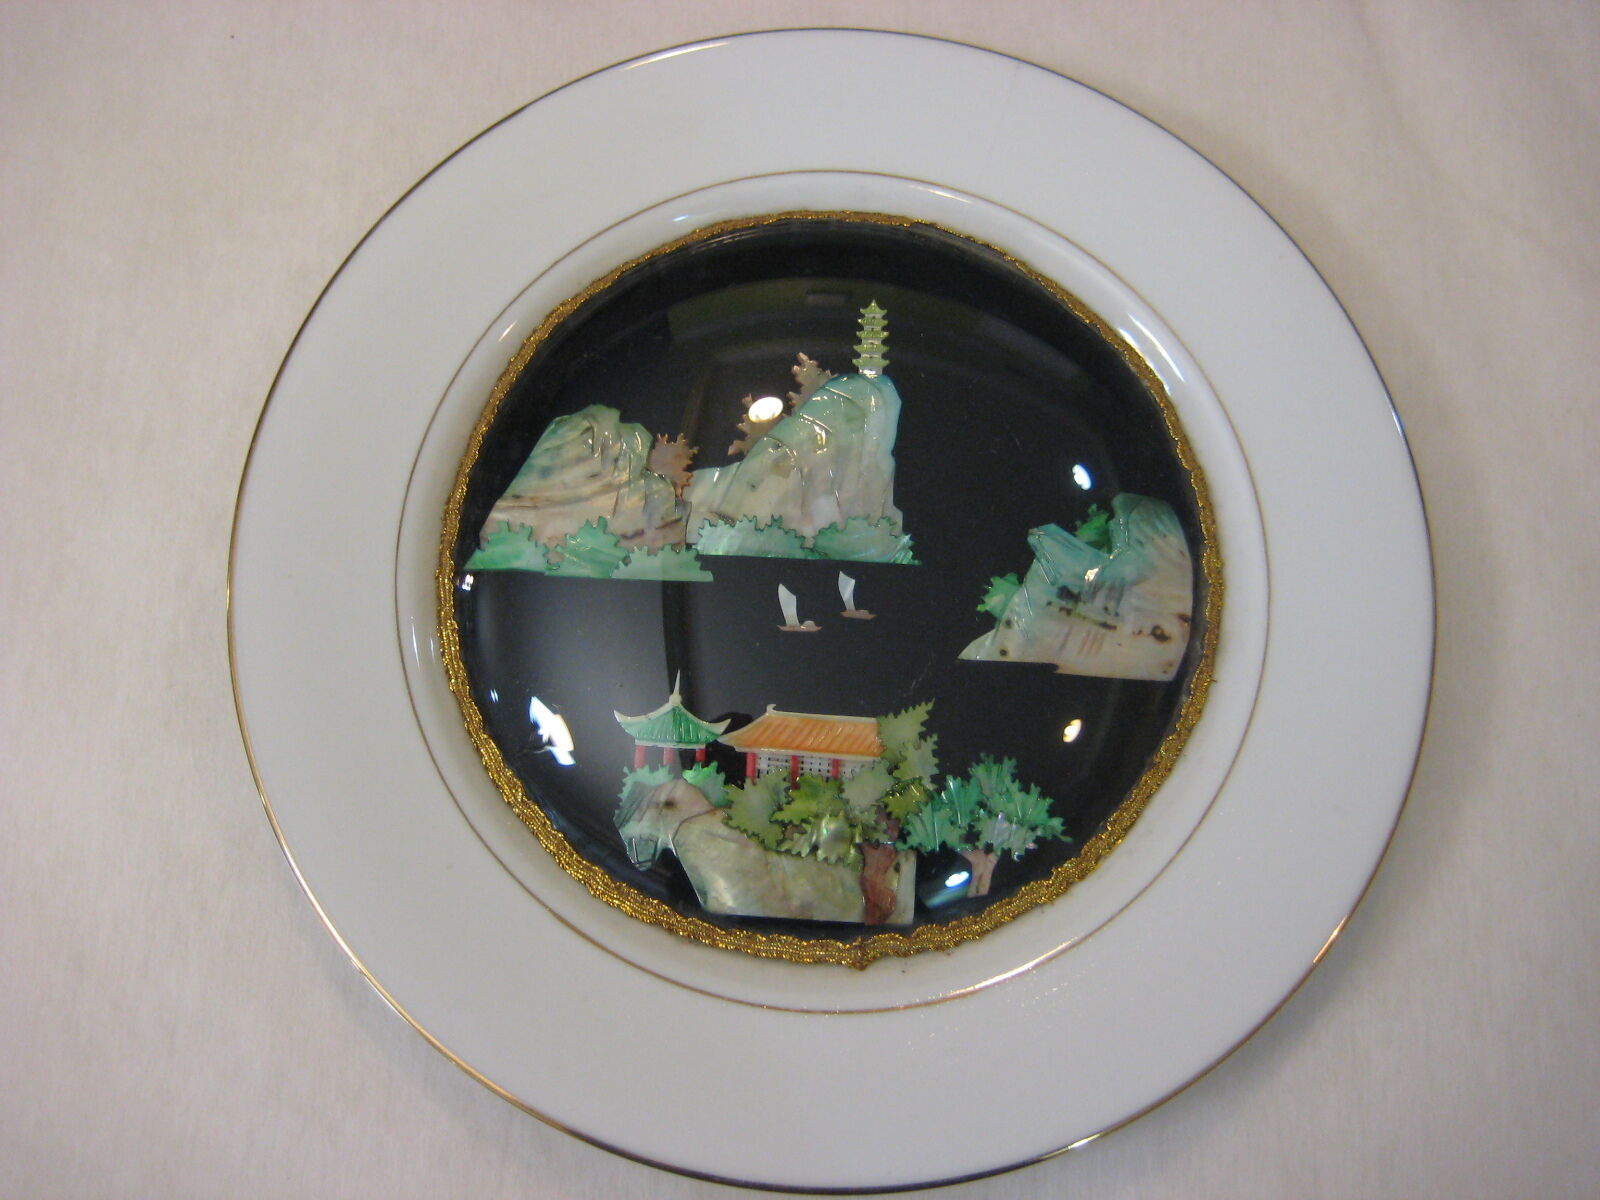 RARE BEAUTIFUL CHINESE MOTHER OF PEARL LANDSCAPE DECORATION ON GUOGUANG PLATE